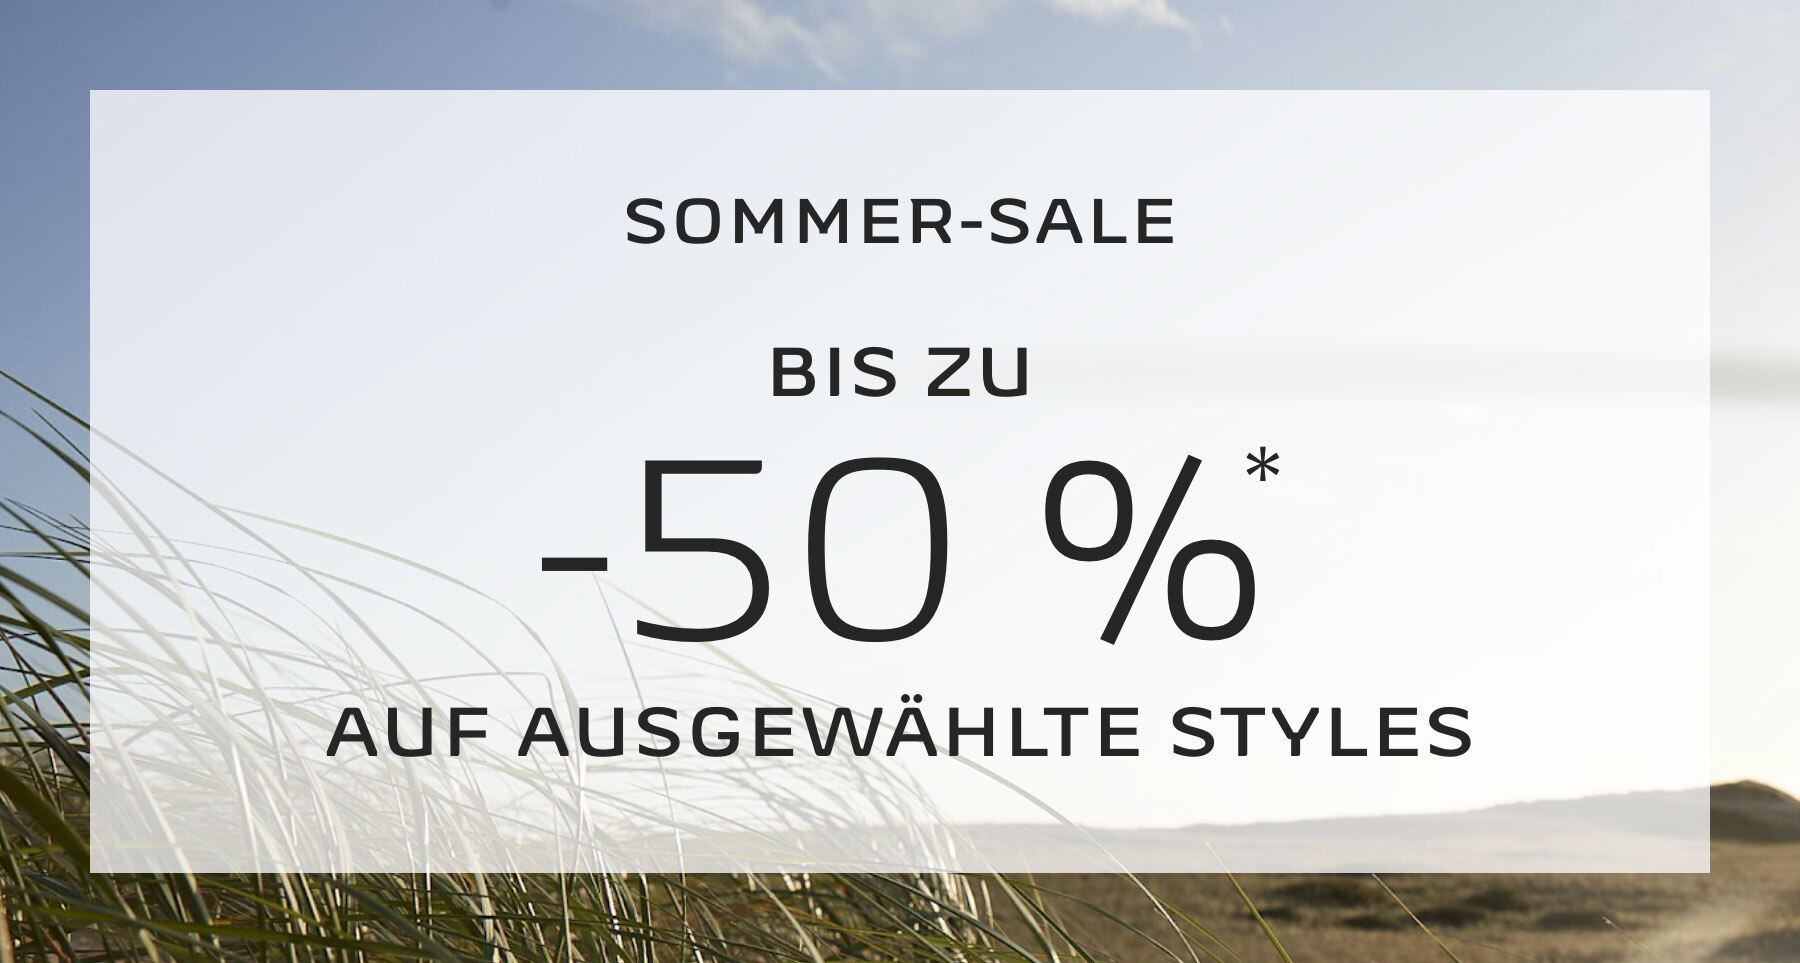 SUMMER SALE UP TO 50% OFF* SELECTED STYLES